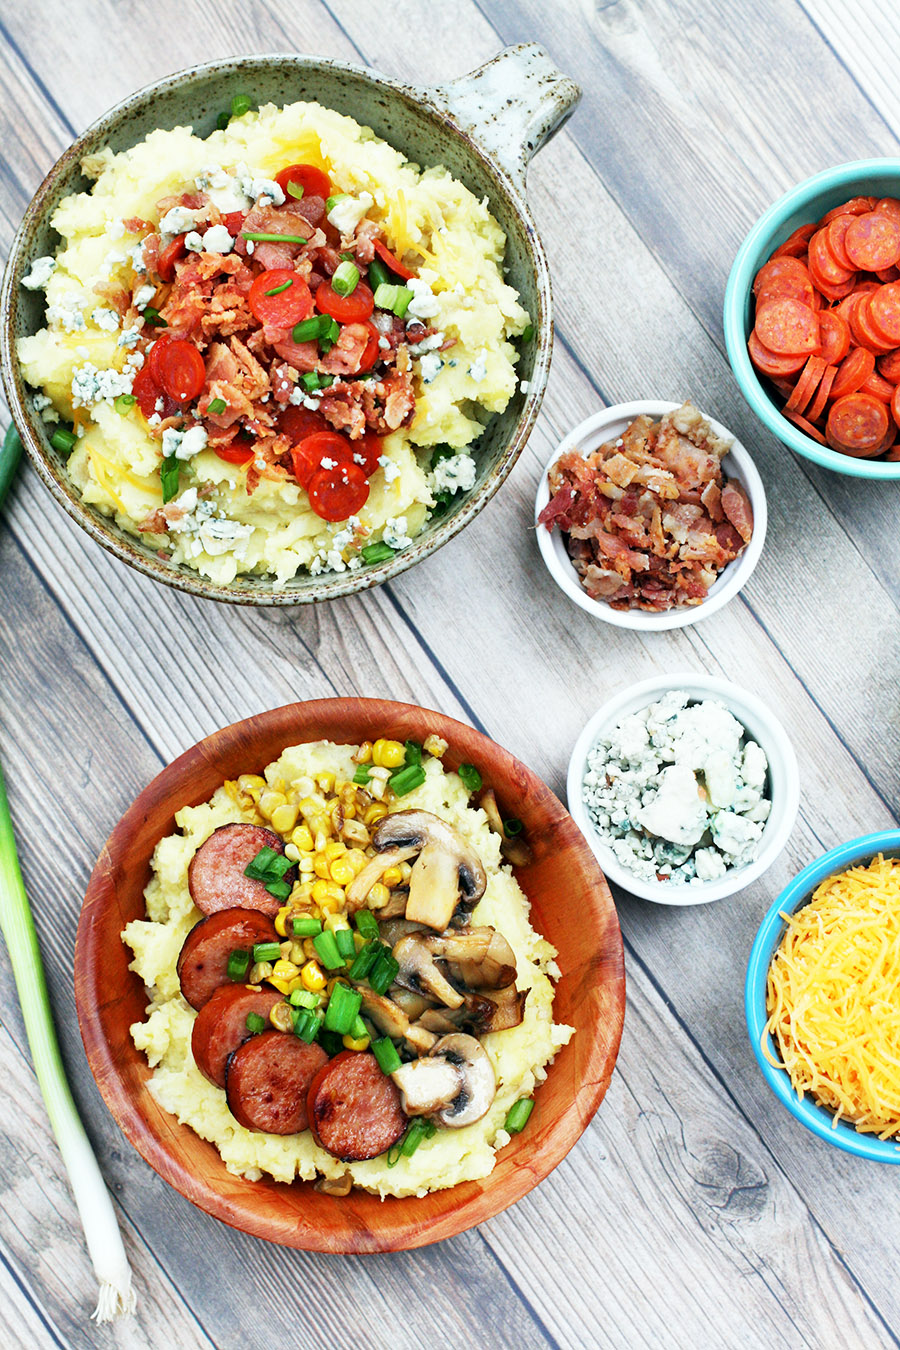 Leftover mashed potato bar: Mashed potatoes with lots of toppings! Click through for recipes.